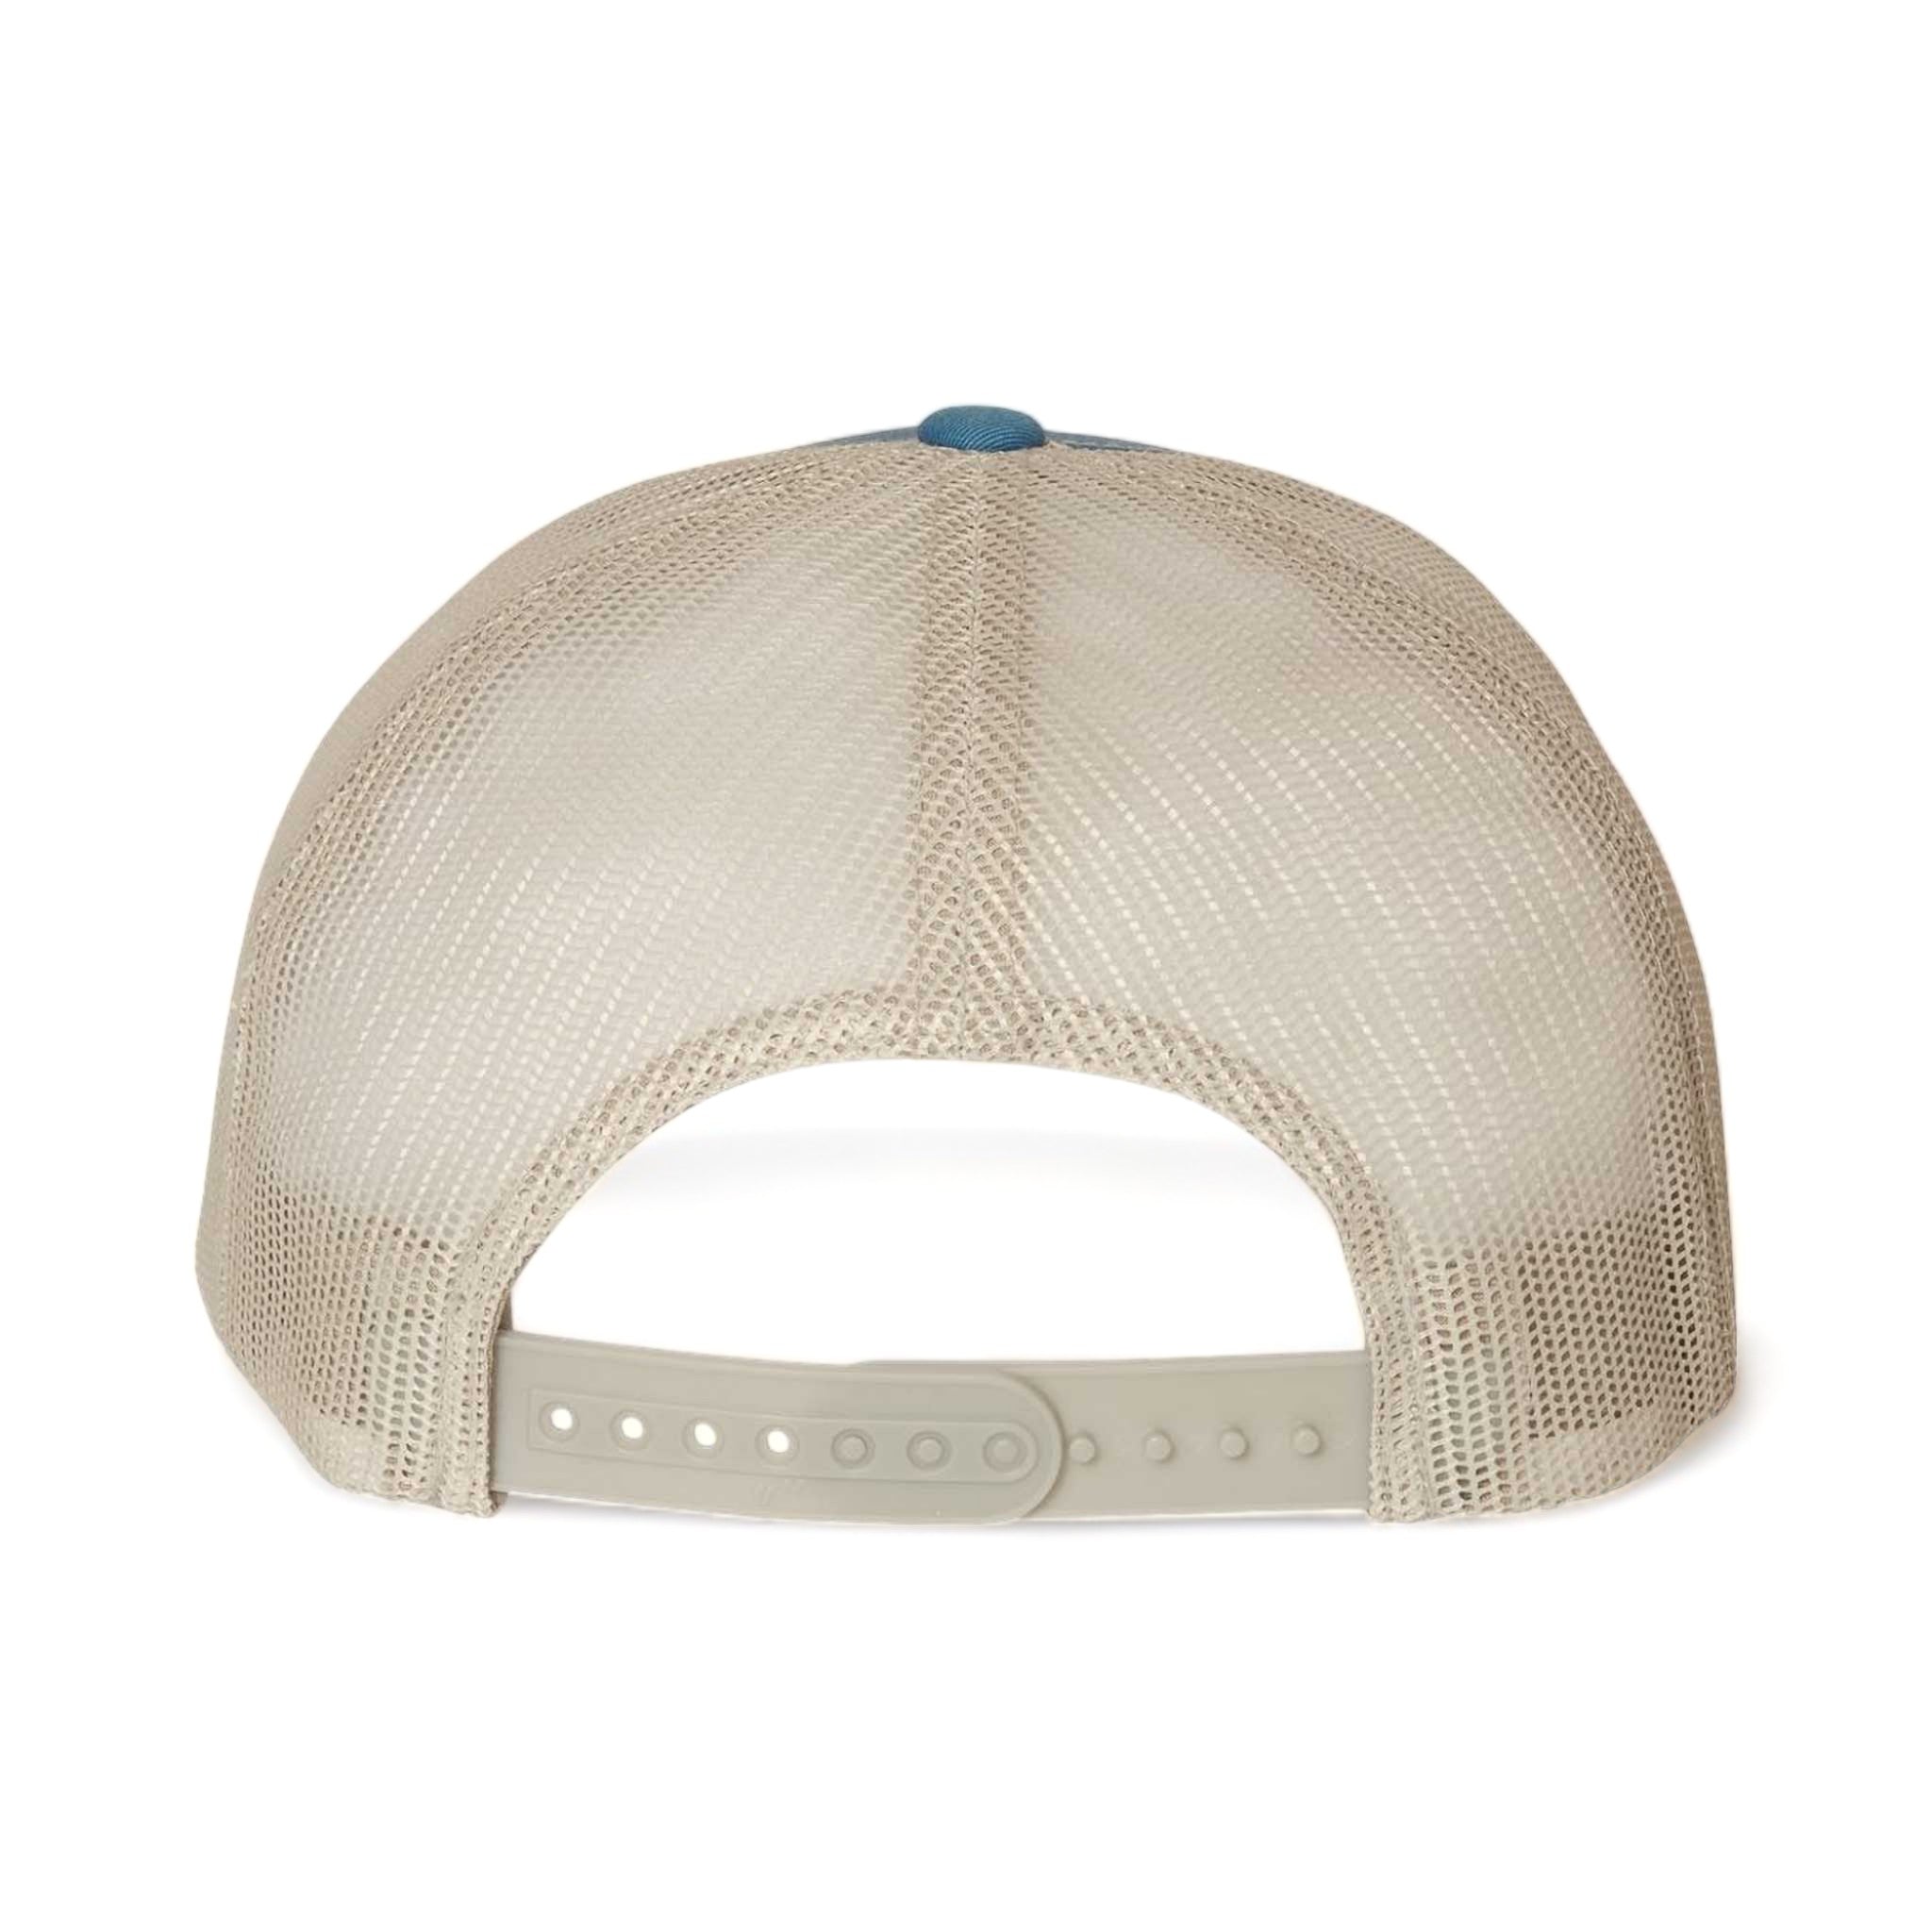 Back view of YP Classics 6606 custom hat in steel blue and silver